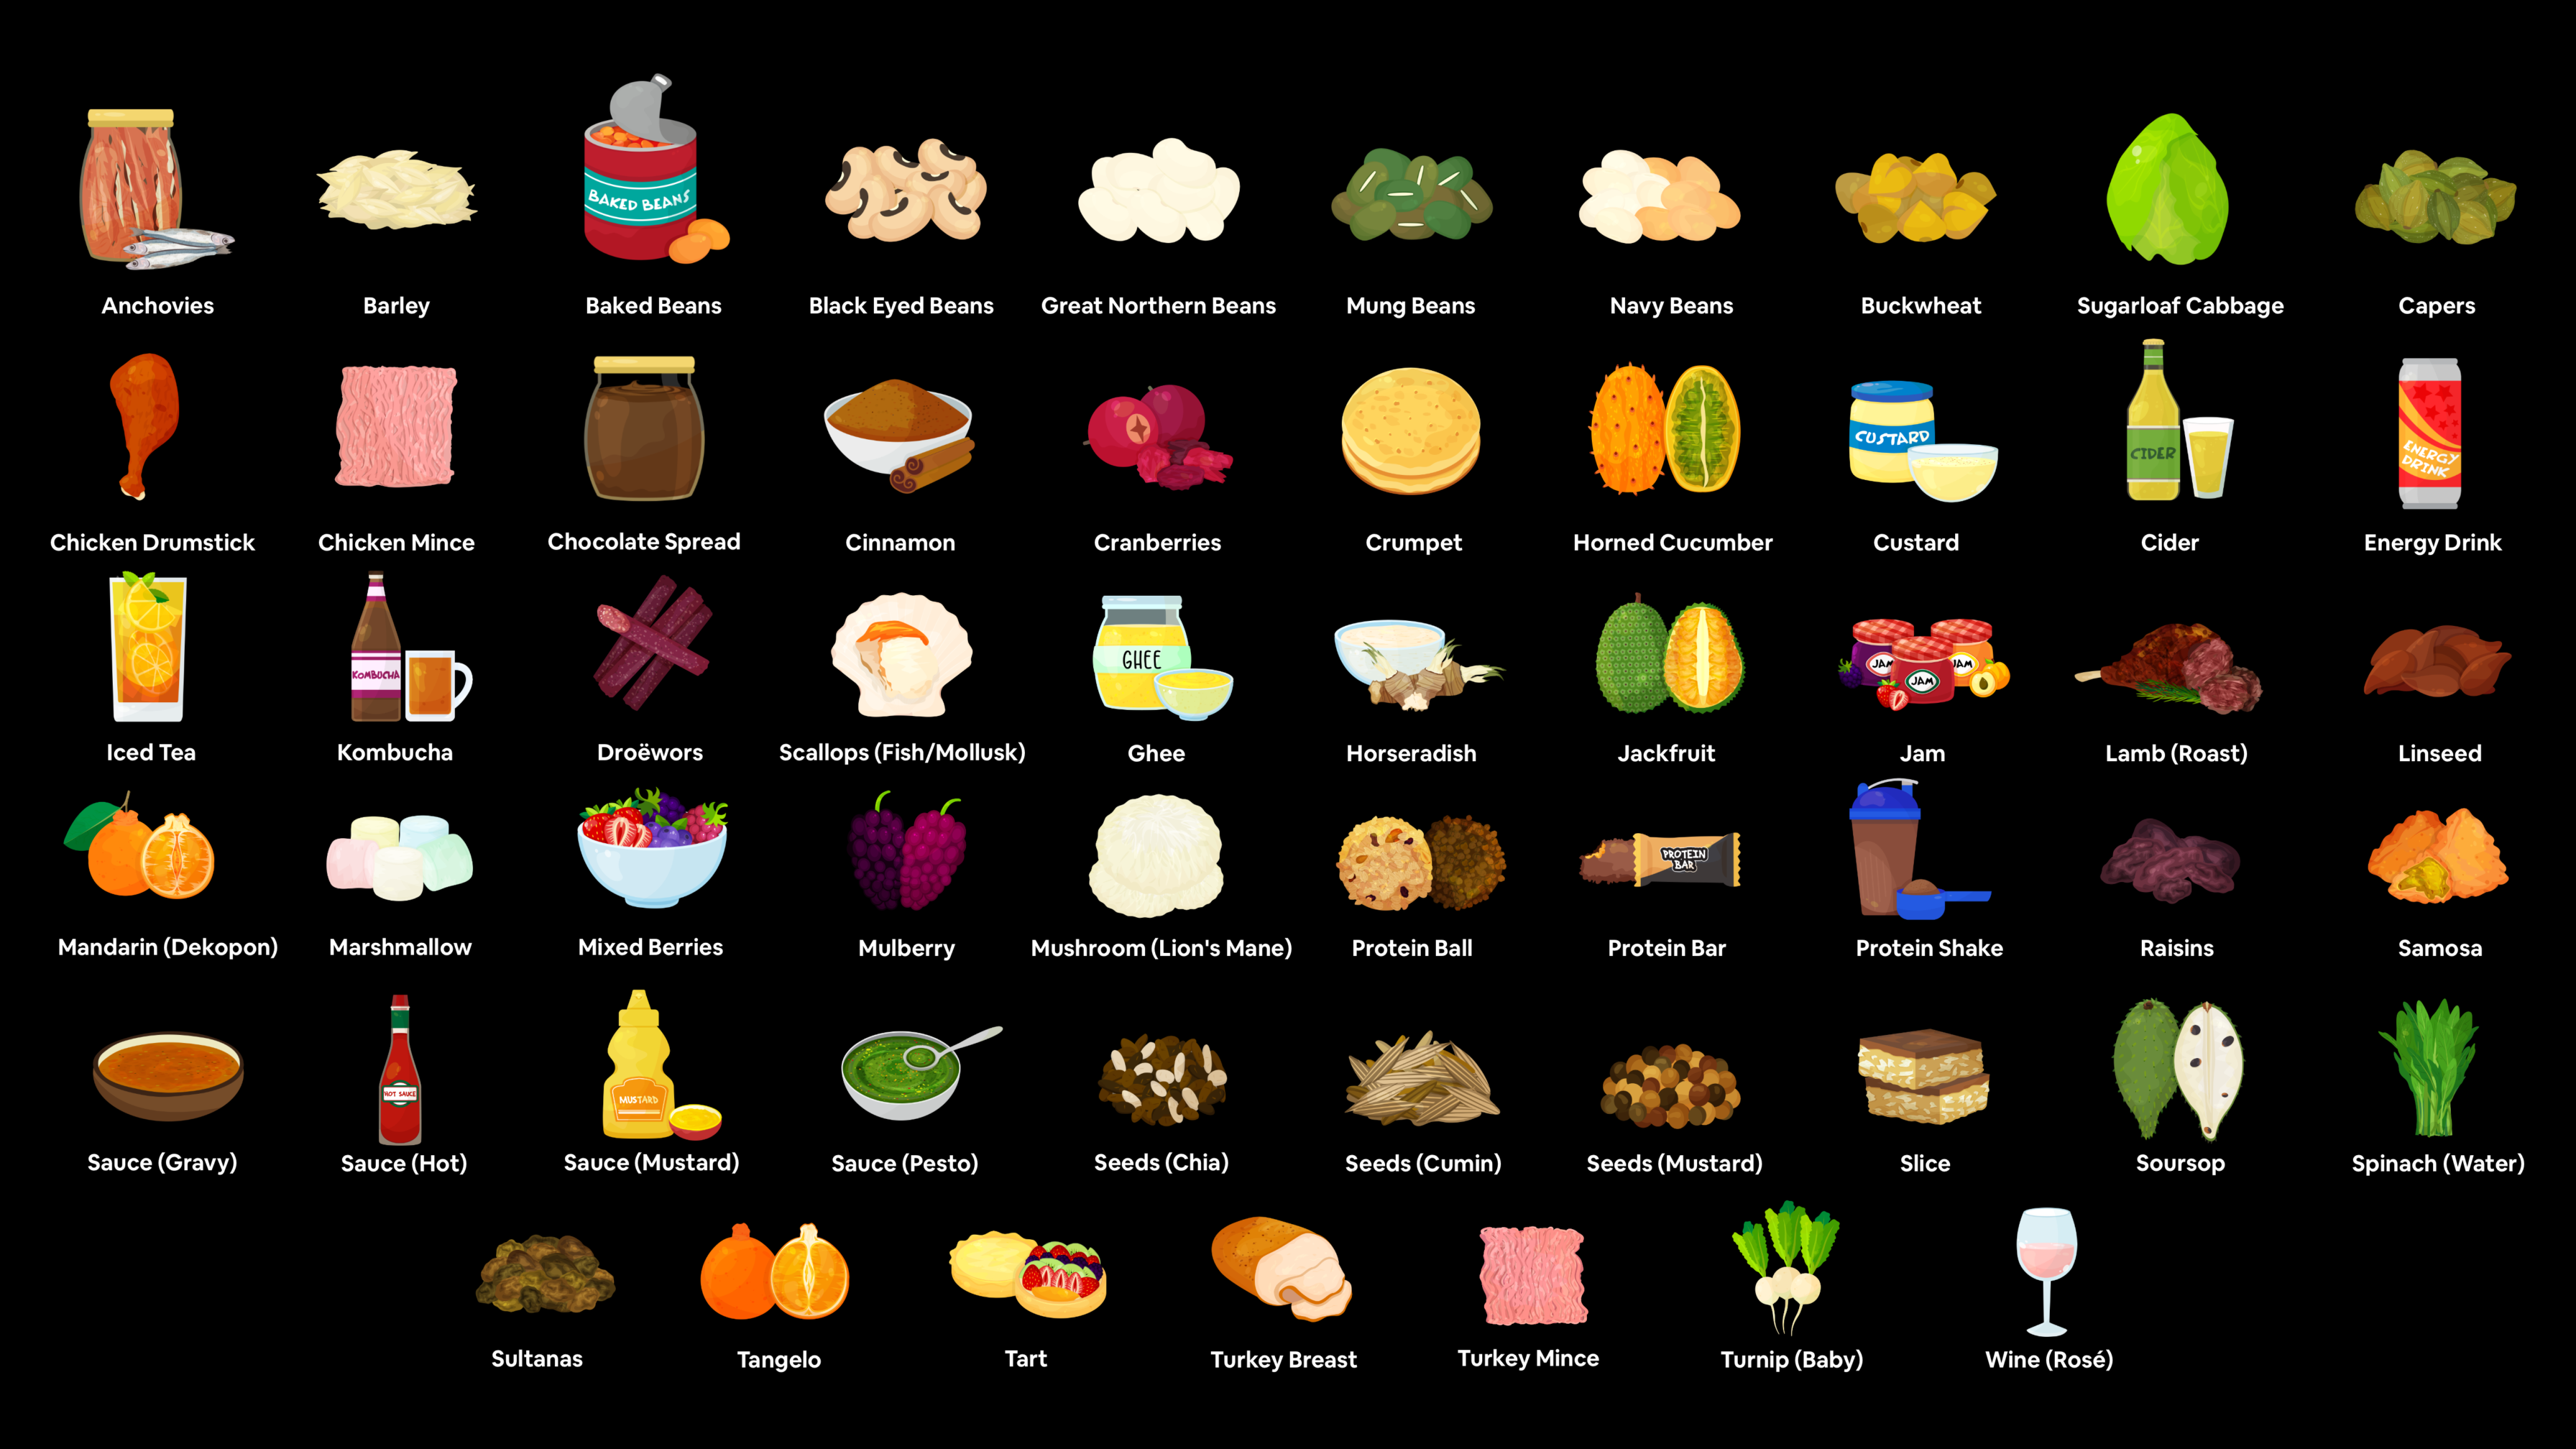 A black background displaying various food icons labeled with their names. The icons include: Anchovies, Barley, Baked Beans, Black Eyed Beans, Great Northern Beans, Mung Beans, Navy Beans, Buckwheat, Sugarloaf Cabbage, Capers, Chicken Drumstick, Chicken Mince, Chocolate Spread, Cinnamon, Cranberries, Crumpet, Horned Cucumber, Custard, Cider, Energy Drink, Iced Tea, Kombucha, Droëwors, Scallops (Fish/Mollusk), Ghee, Horseradish, Jackfruit, Jam, Lamb (Roast), Linseed, Mandarin (Dekopon), Marshmallow, Mixed Berries, Mulberry, Mushroom (Lion's Mane), Protein Ball, Protein Bar, Protein Shake, Raisins, Samosa, Sauce (Gravy), Sauce (Hot), Sauce (Mustard), Sauce (Pesto), Seeds (Chia), Seeds (Cumin), Seeds (Mustard), Slice, Soursop, Spinach (Water), Sultanas, Tangelo, Tart, Turkey Breast, Turkey Mince, Turnip (Baby), Wine (Rosé).